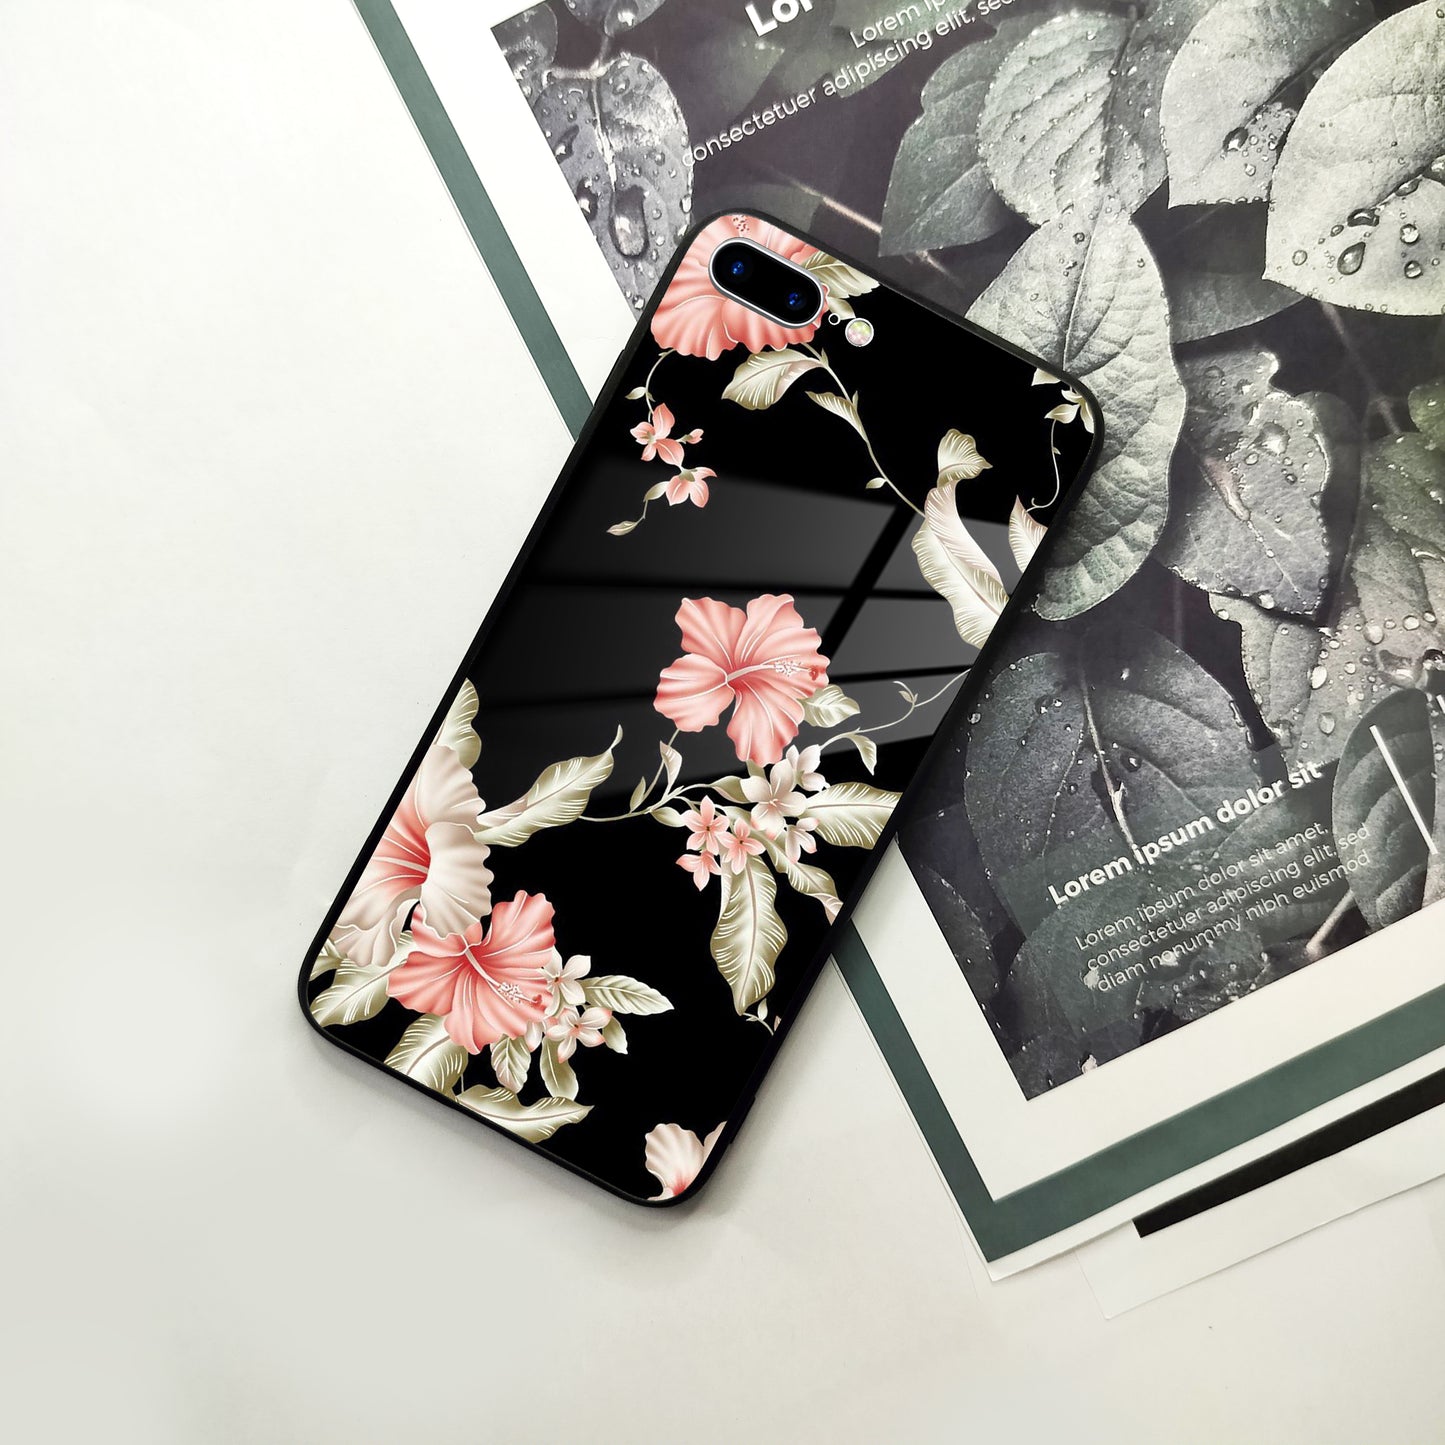 Retro Floral Glass Phone Case Cover iPhone